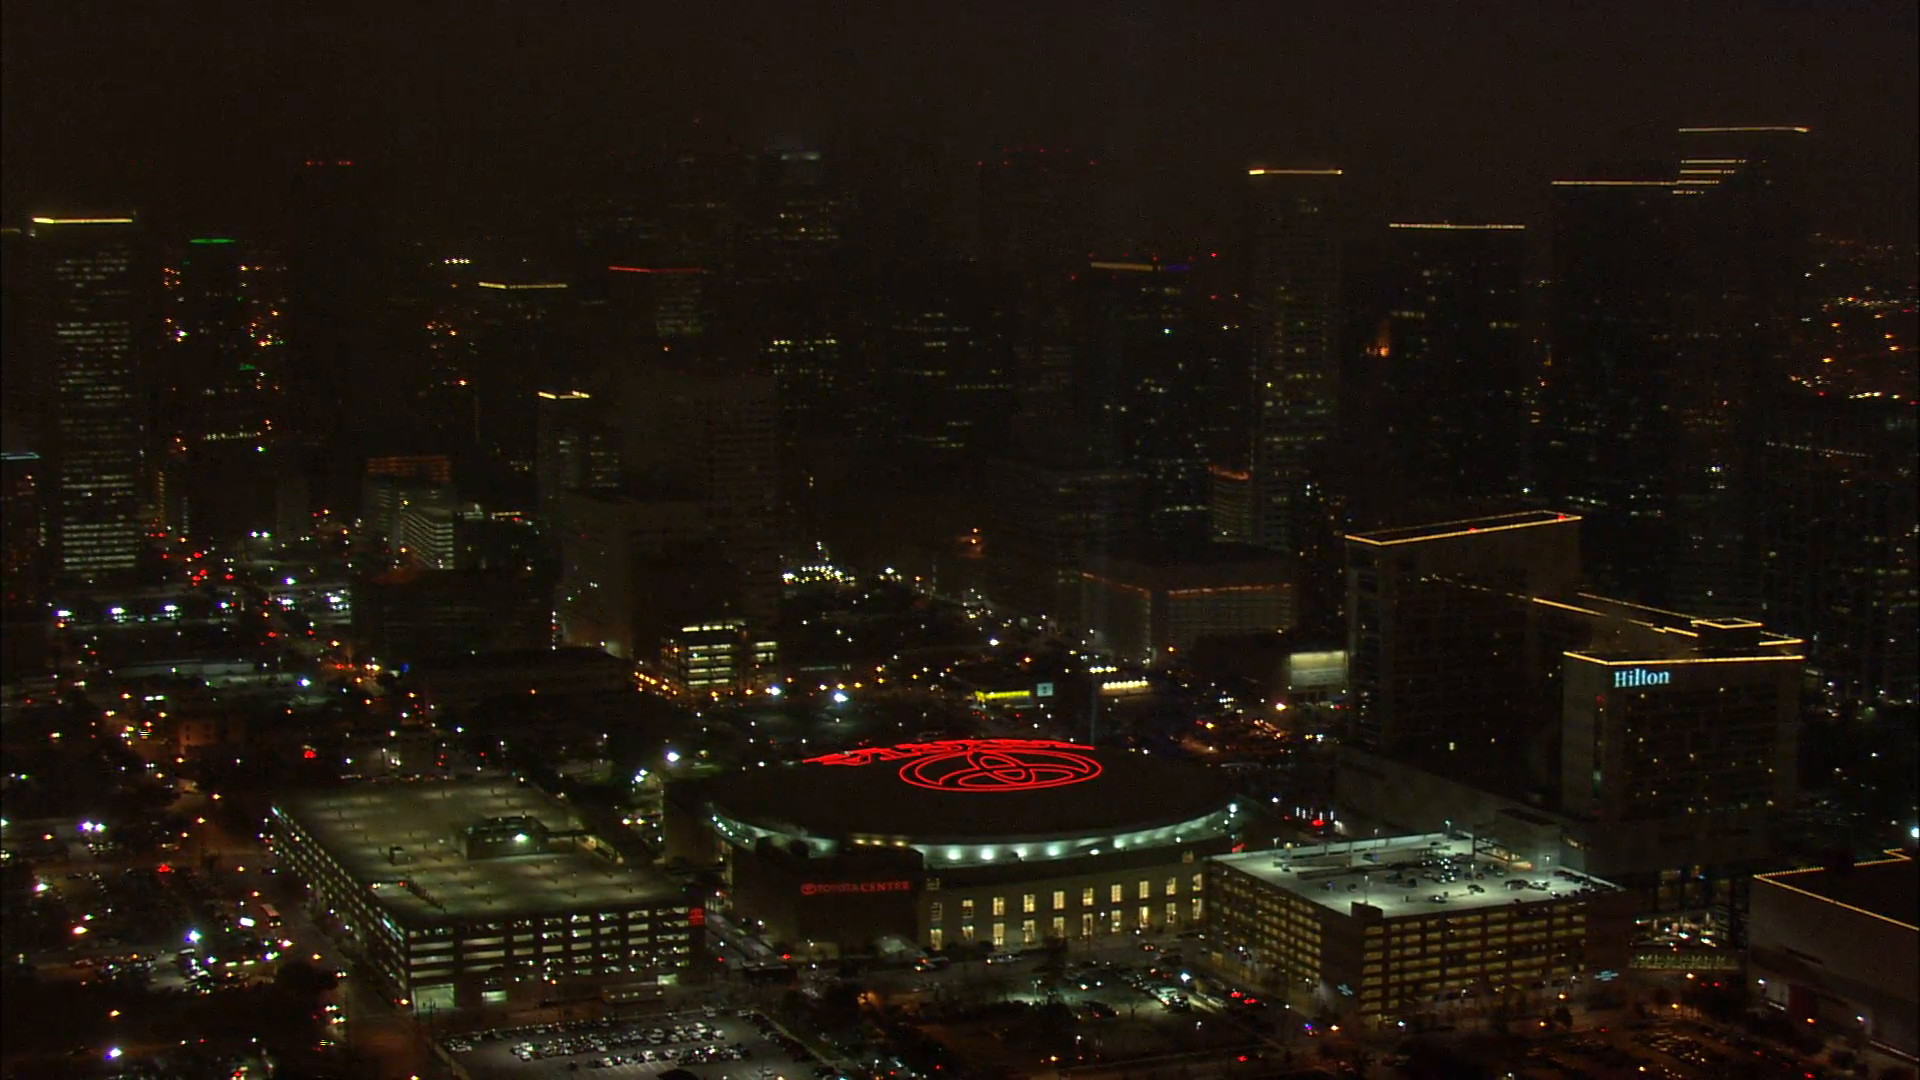 1920x1080 Houston Skyline Nighttime. A beautiful aerial view of the Houston skyline at  night. Towering buildings light up the background with the Toyota Center at  the ...